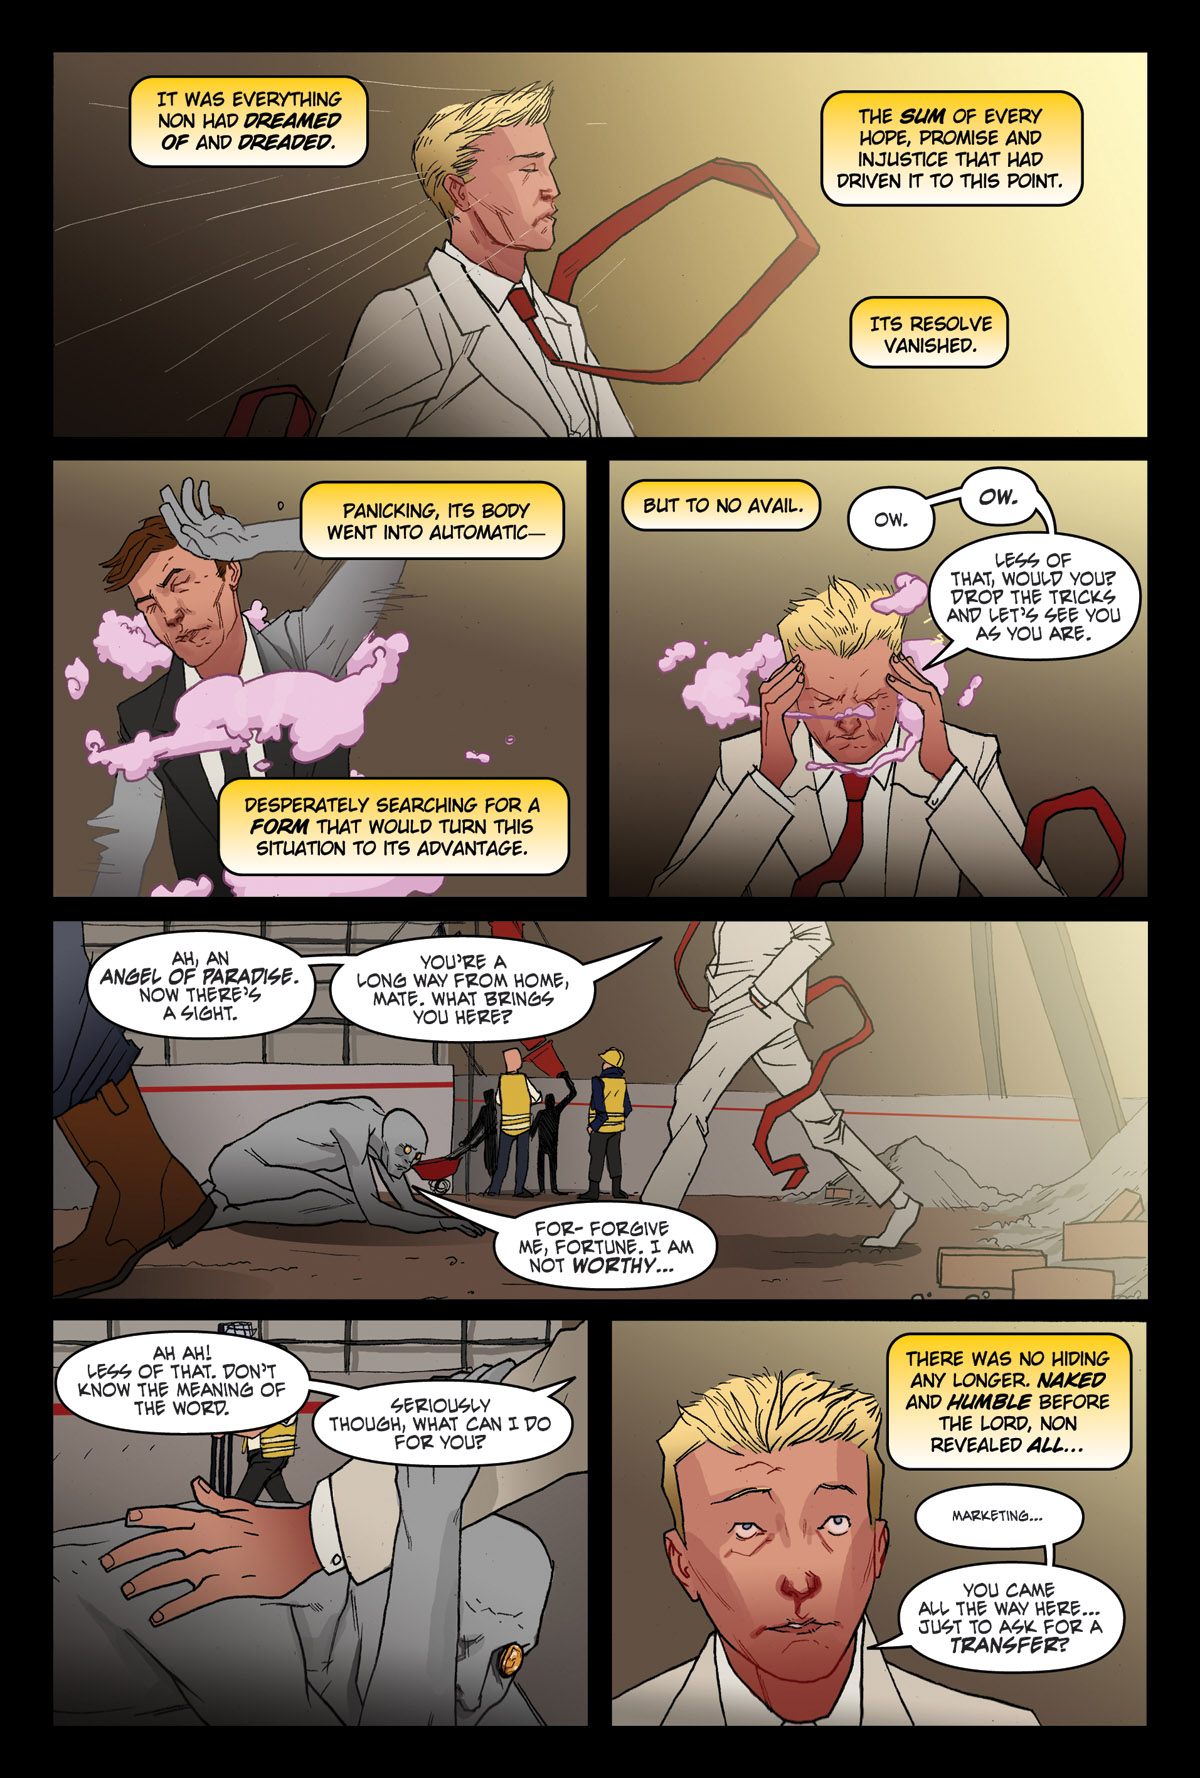 Afterlife Inc. | On High | Page 8